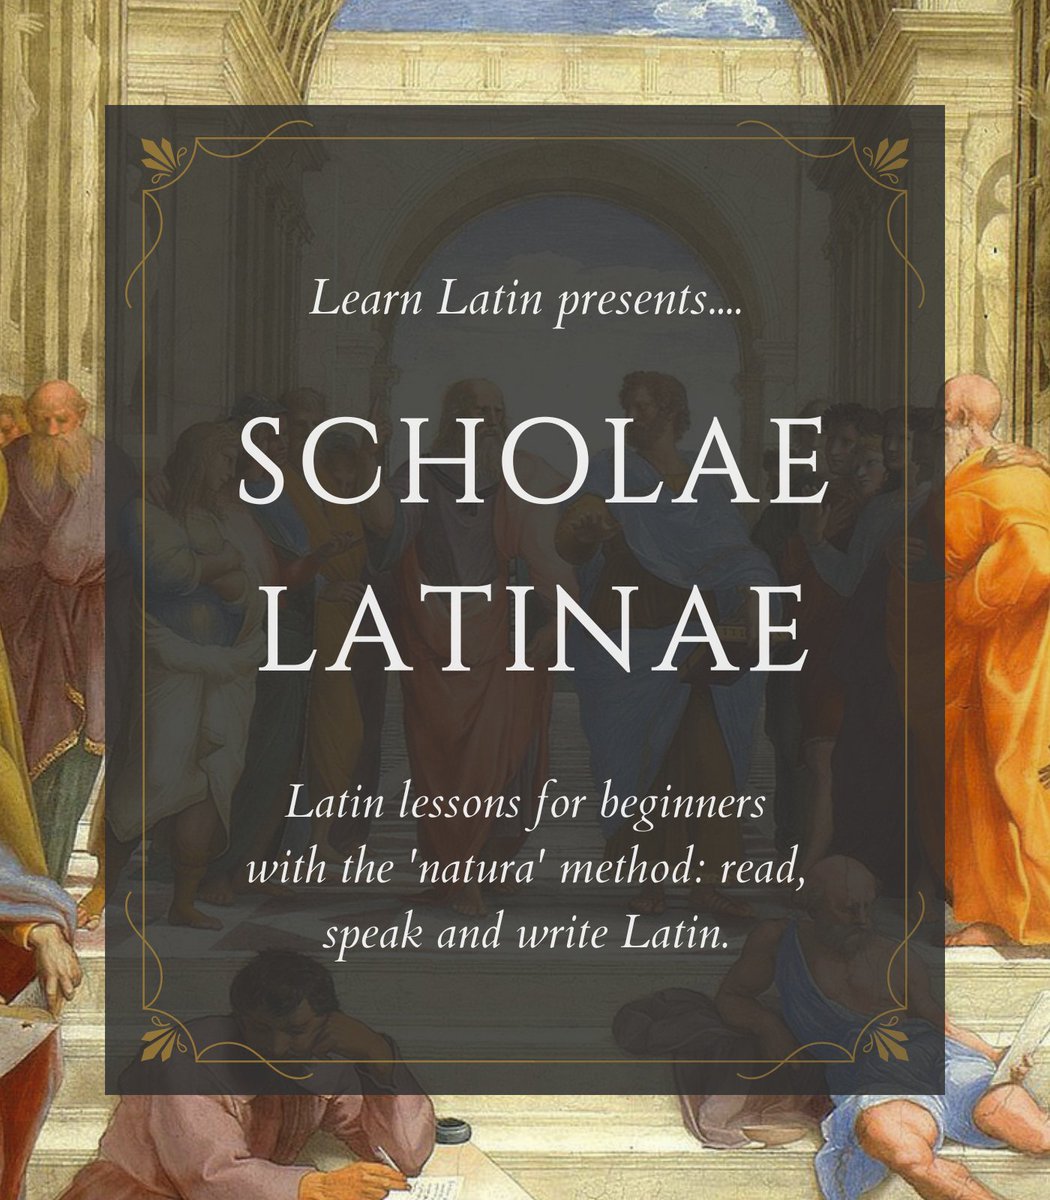 As we happily surpass 30,000 followers, I want to announce that in the next few weeks we will be starting a series of free Latin lessons for absolute beginners here at X. The lessons will be broadcast live, with live participants, recorded and then uploaded for free viewing…